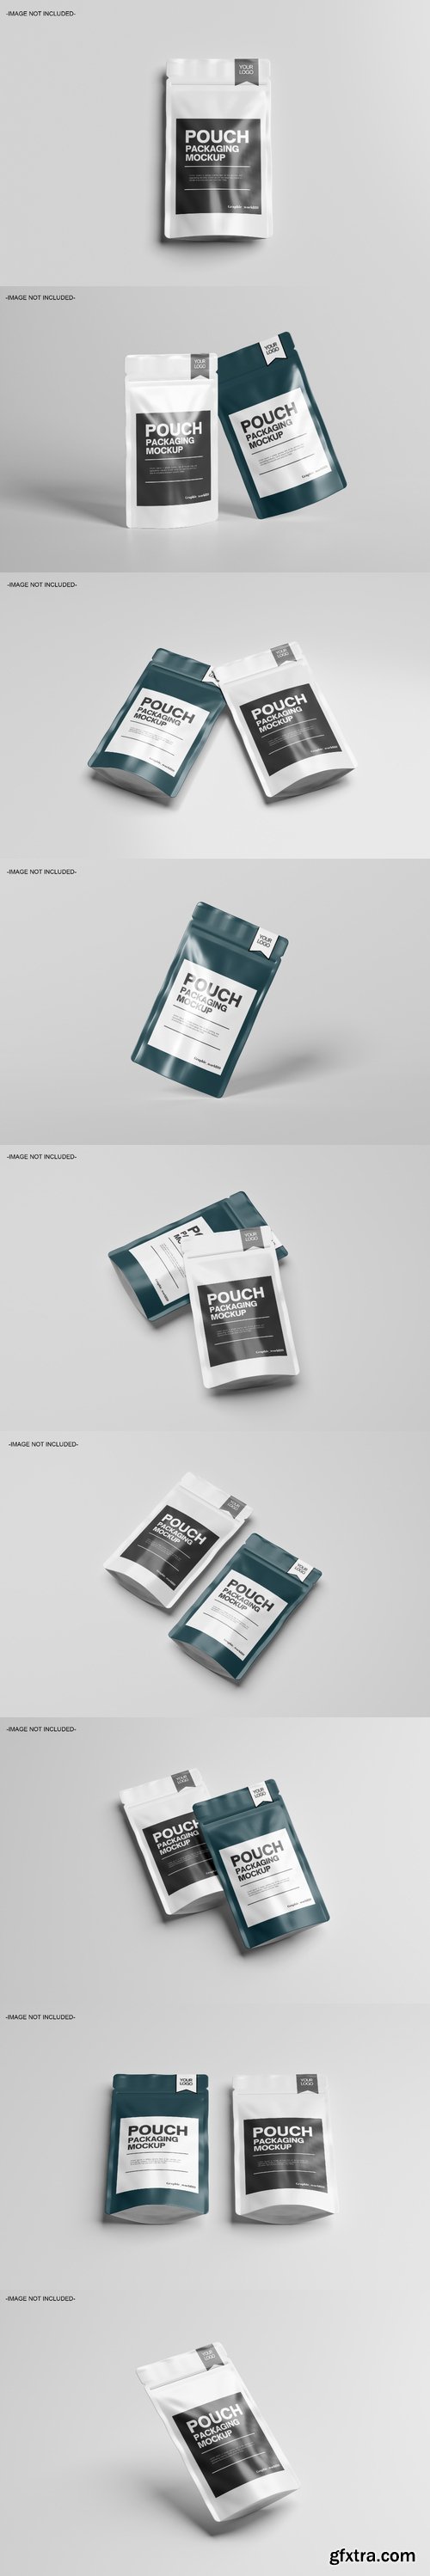 Pouch packaging mockup